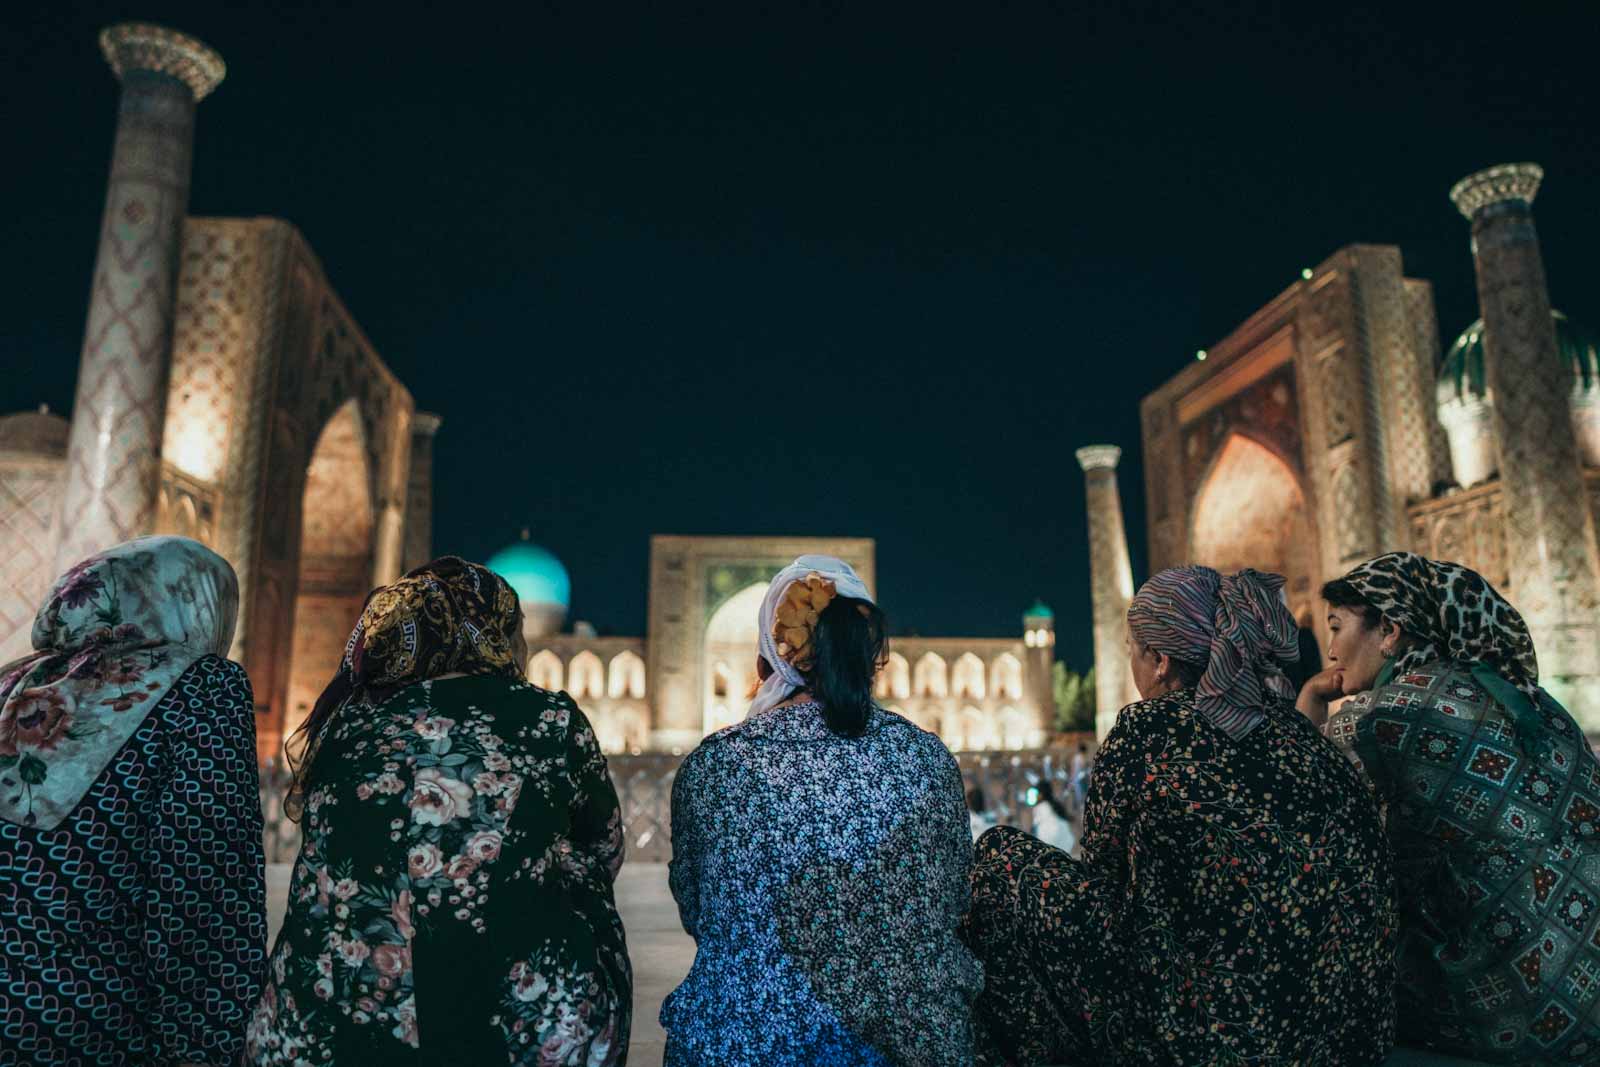 Samarkand old town during night